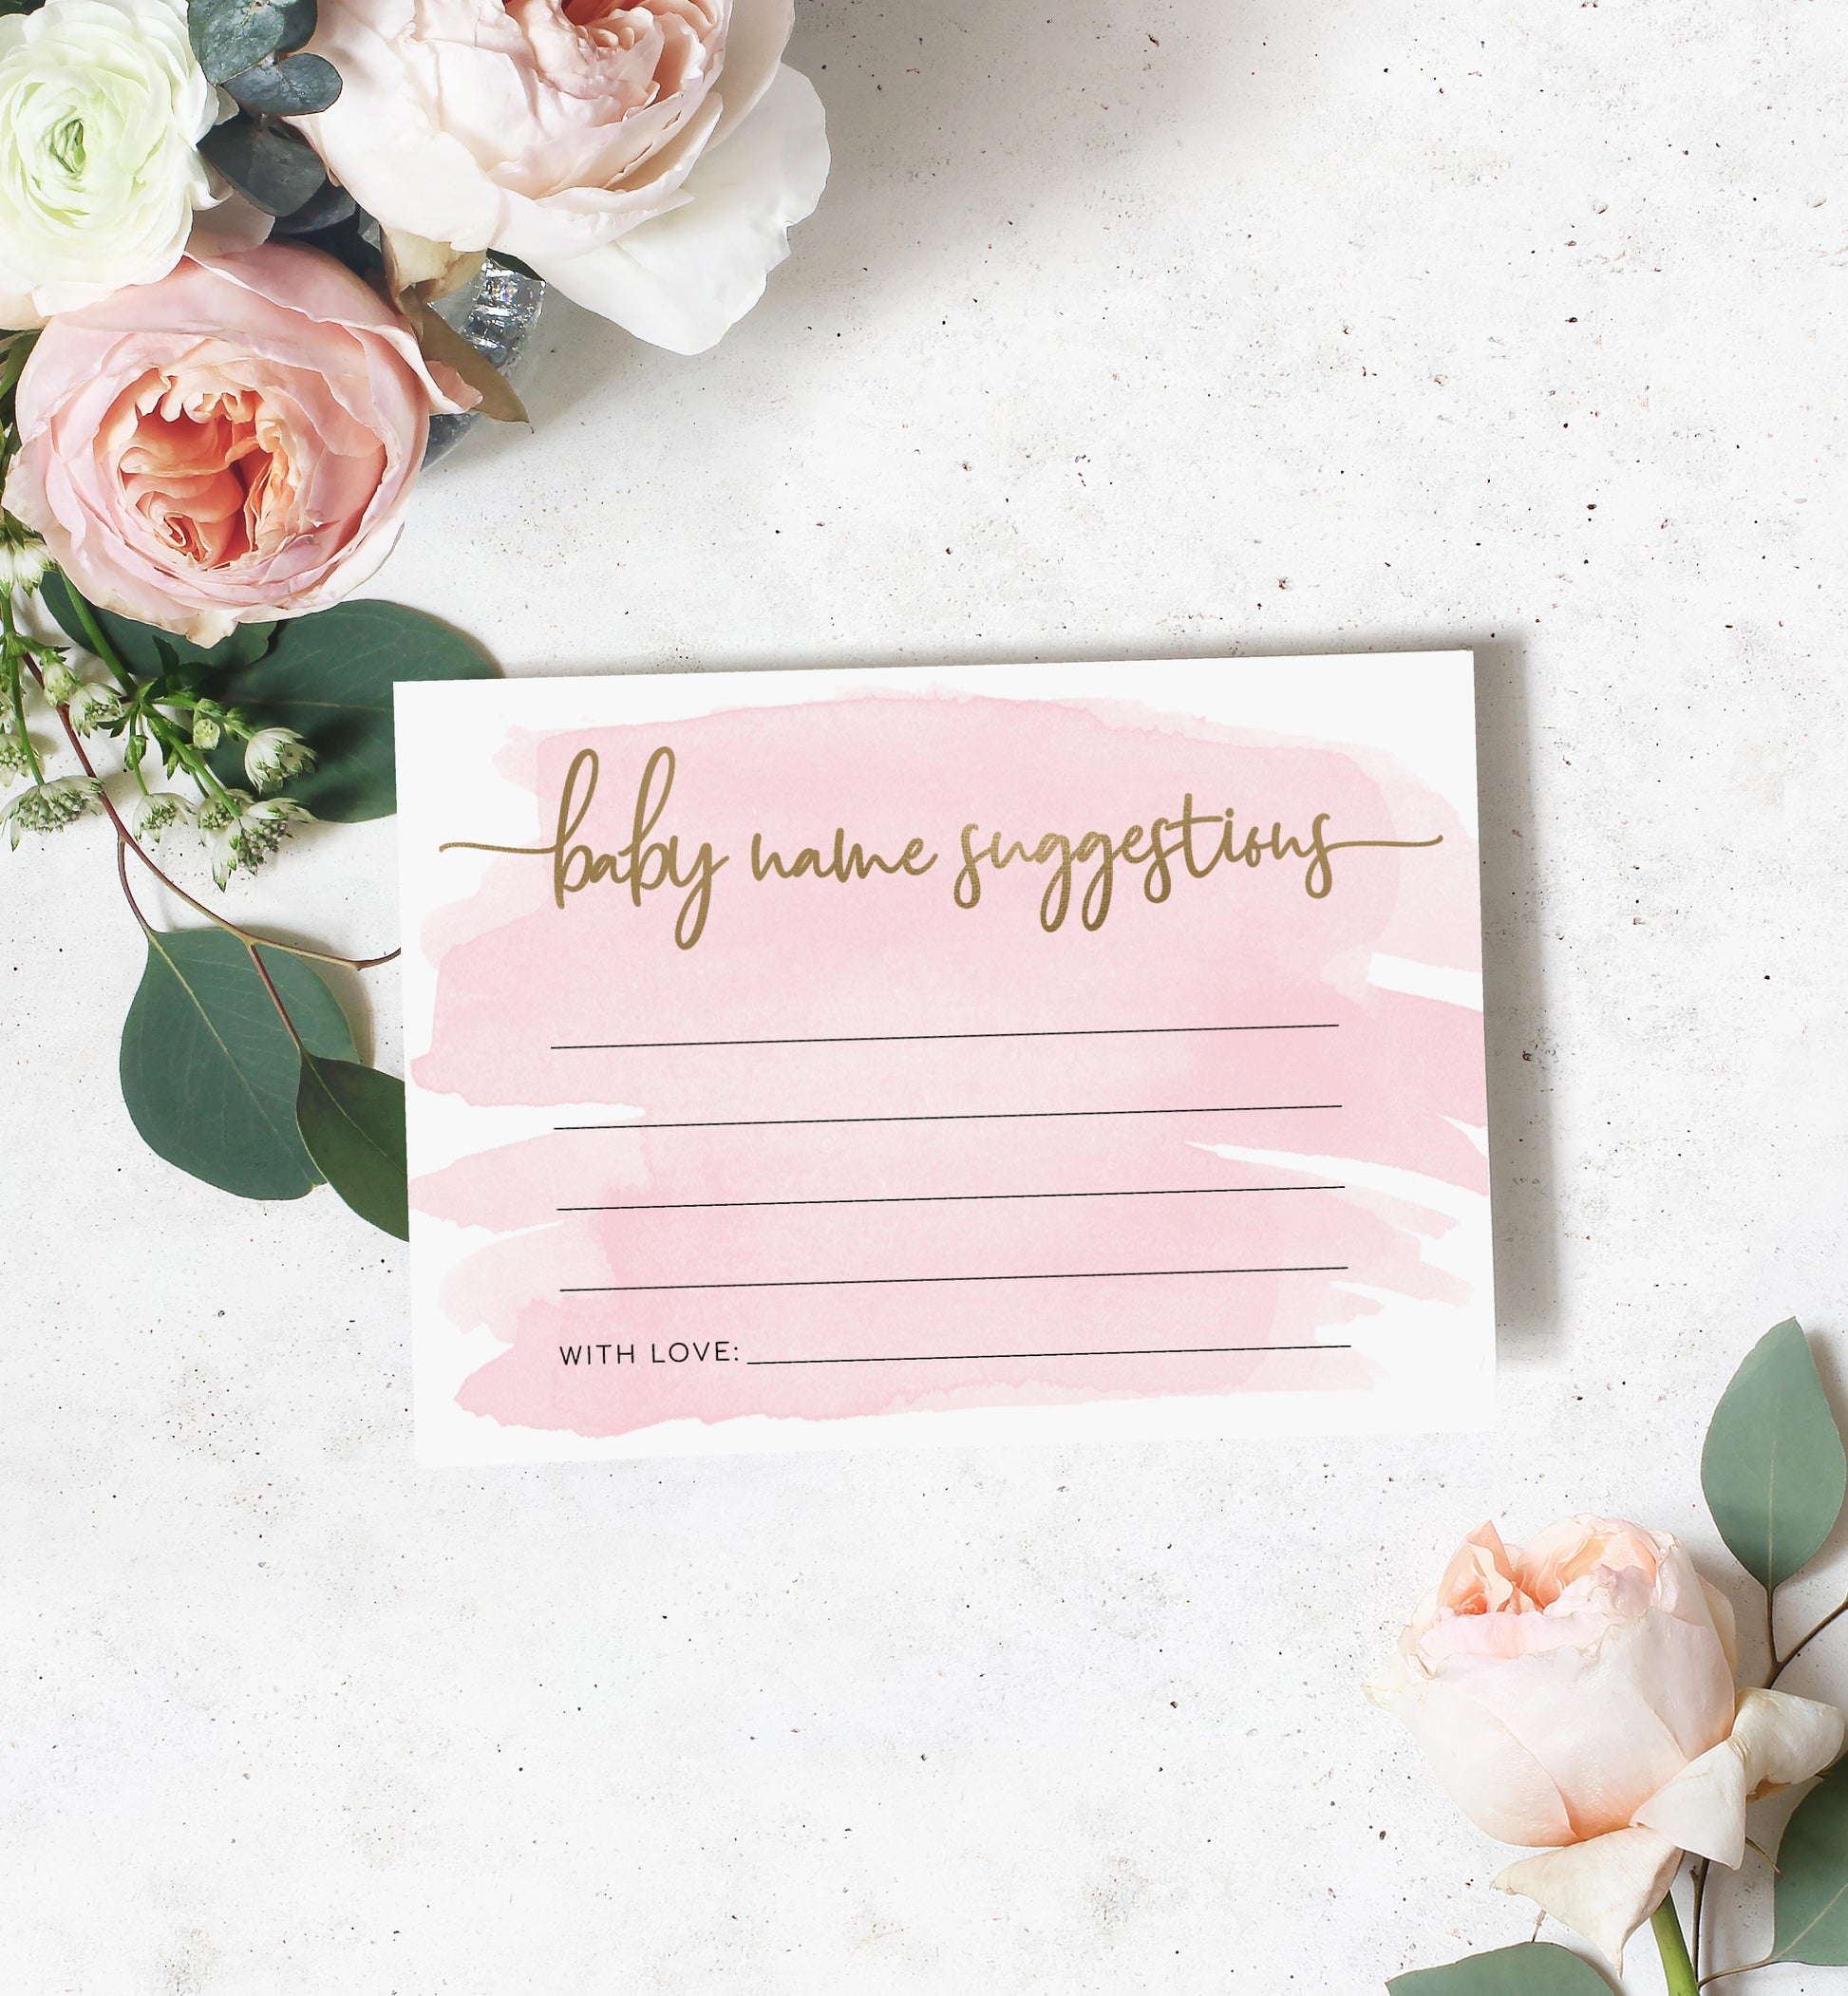 Baby Name Suggestions Card and Sign, Pink Watercolour Baby Name Ideas Game, Printable Girl Baby Shower Game